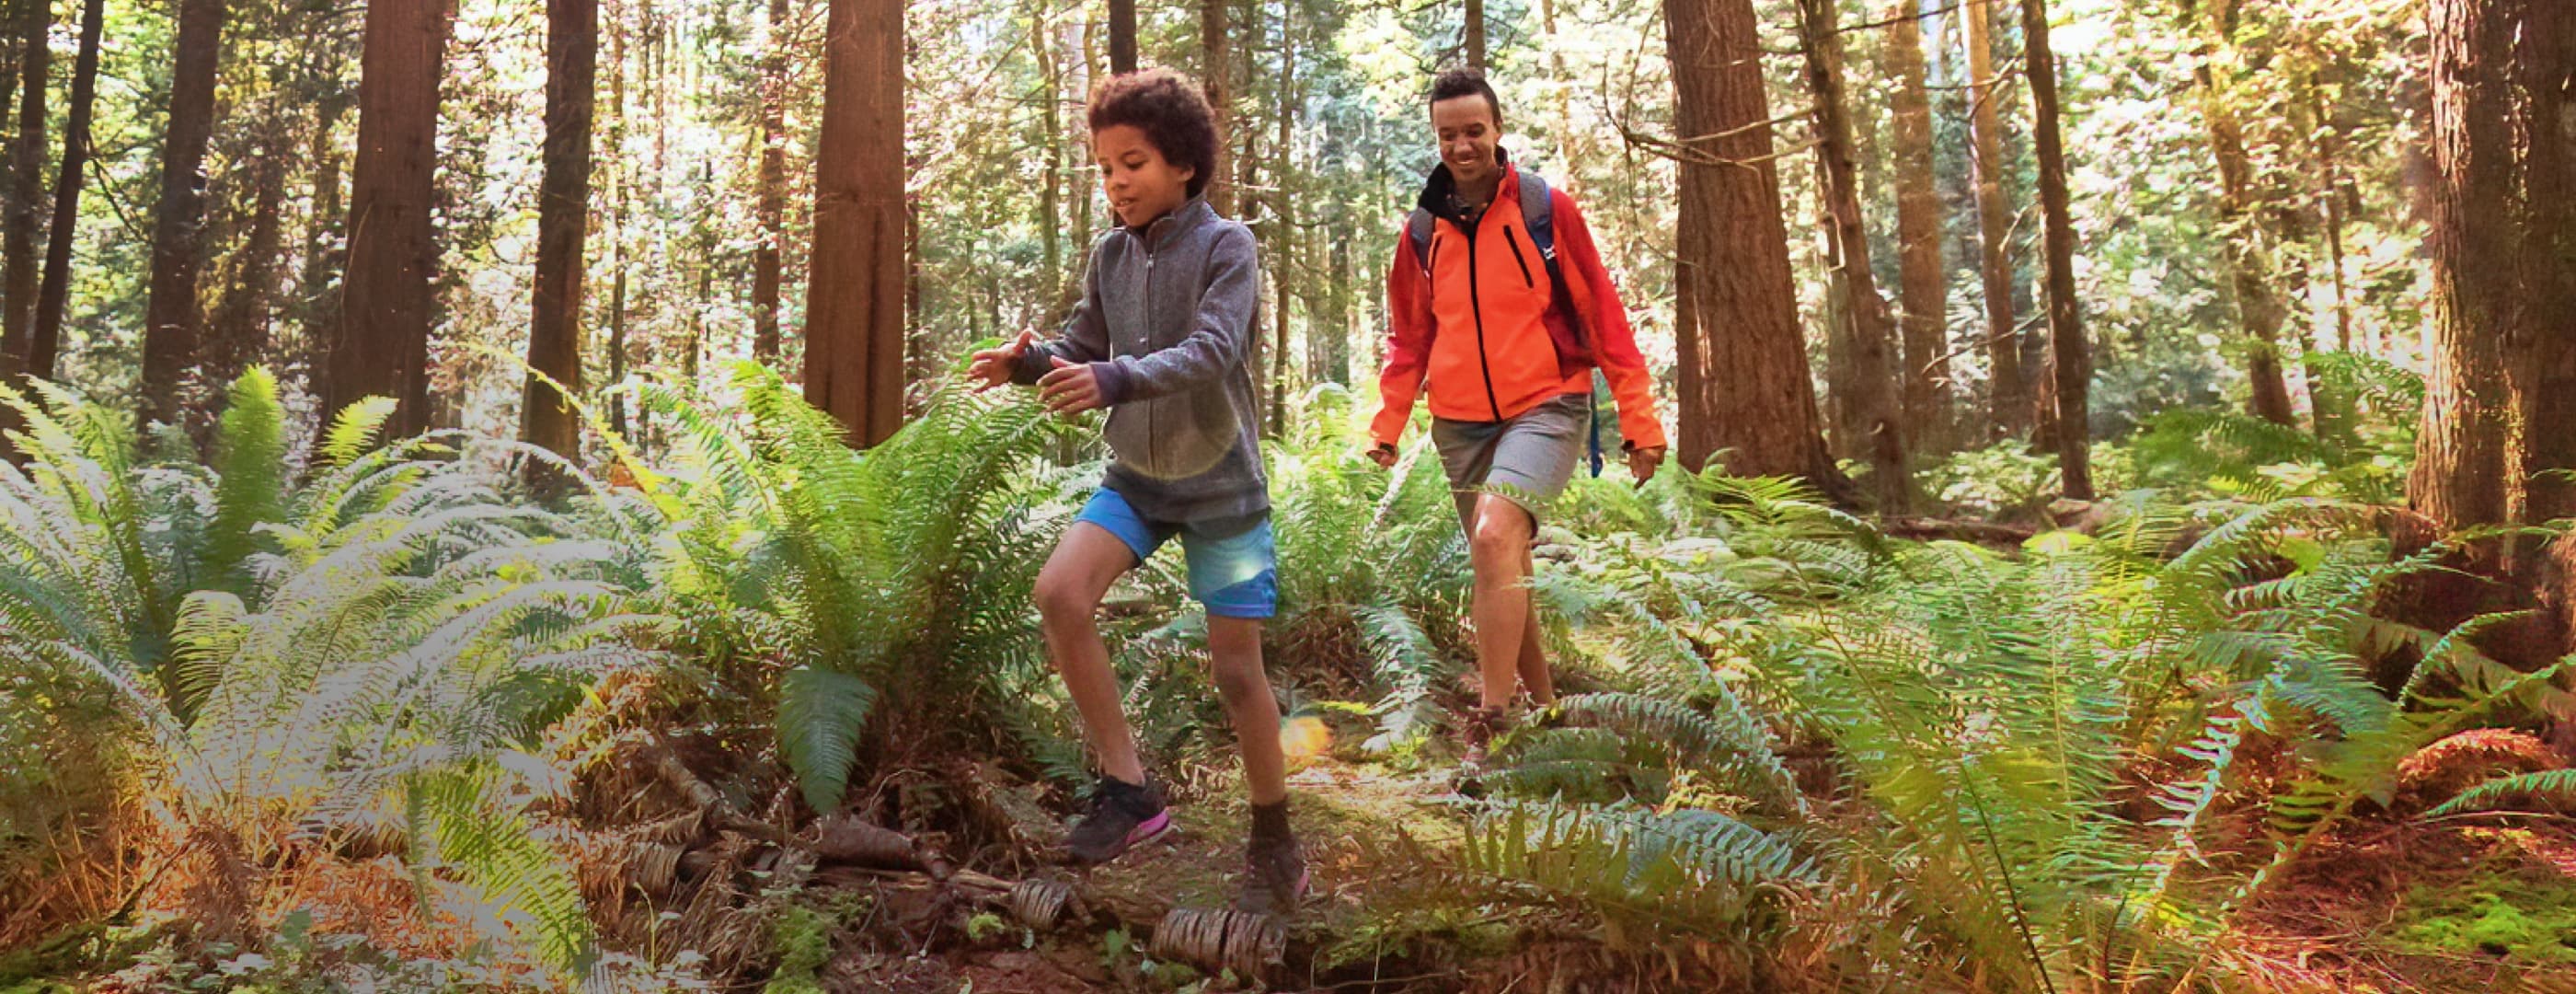 An adult in an orange raincoat and a child in a grey sweatshirt with dark hair are hiking through a forest, the adult smiles as the child skips over a small log on the trail.